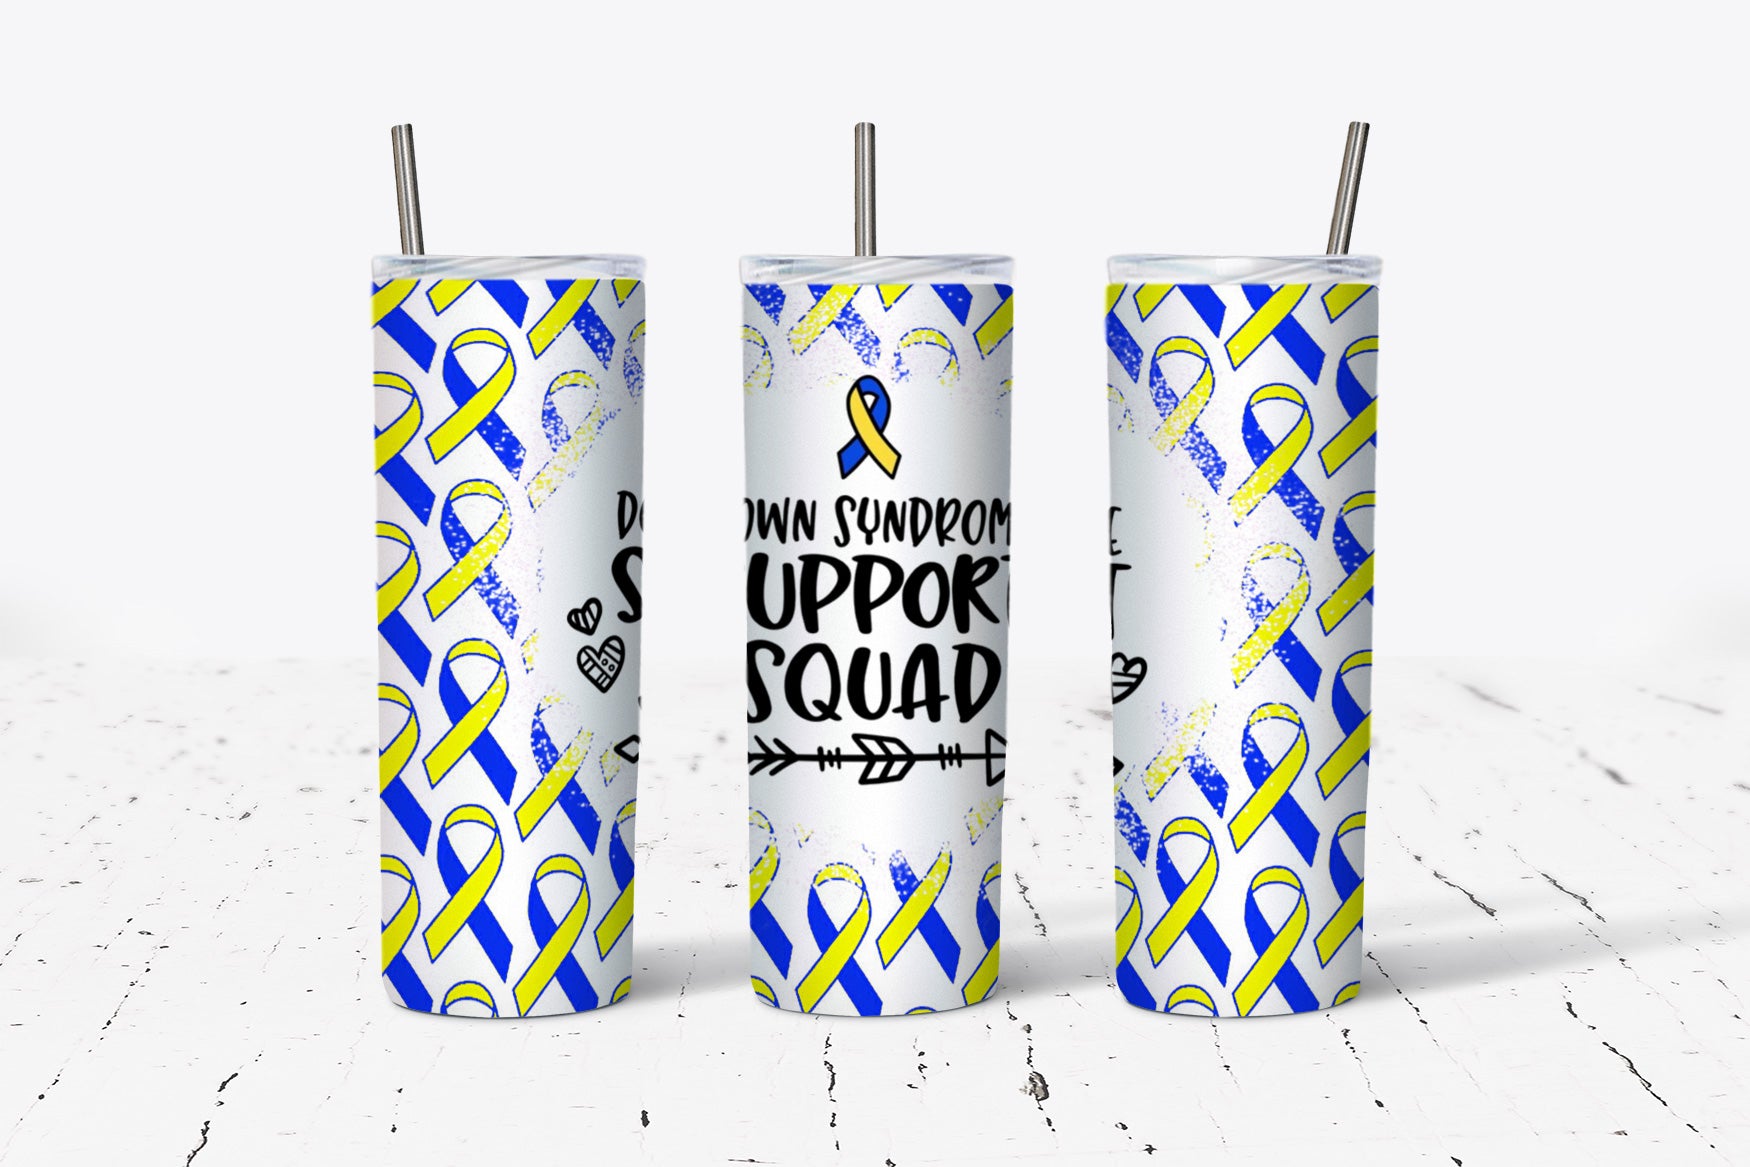 Downs Syndrome Support Squad 20oz Tumbler